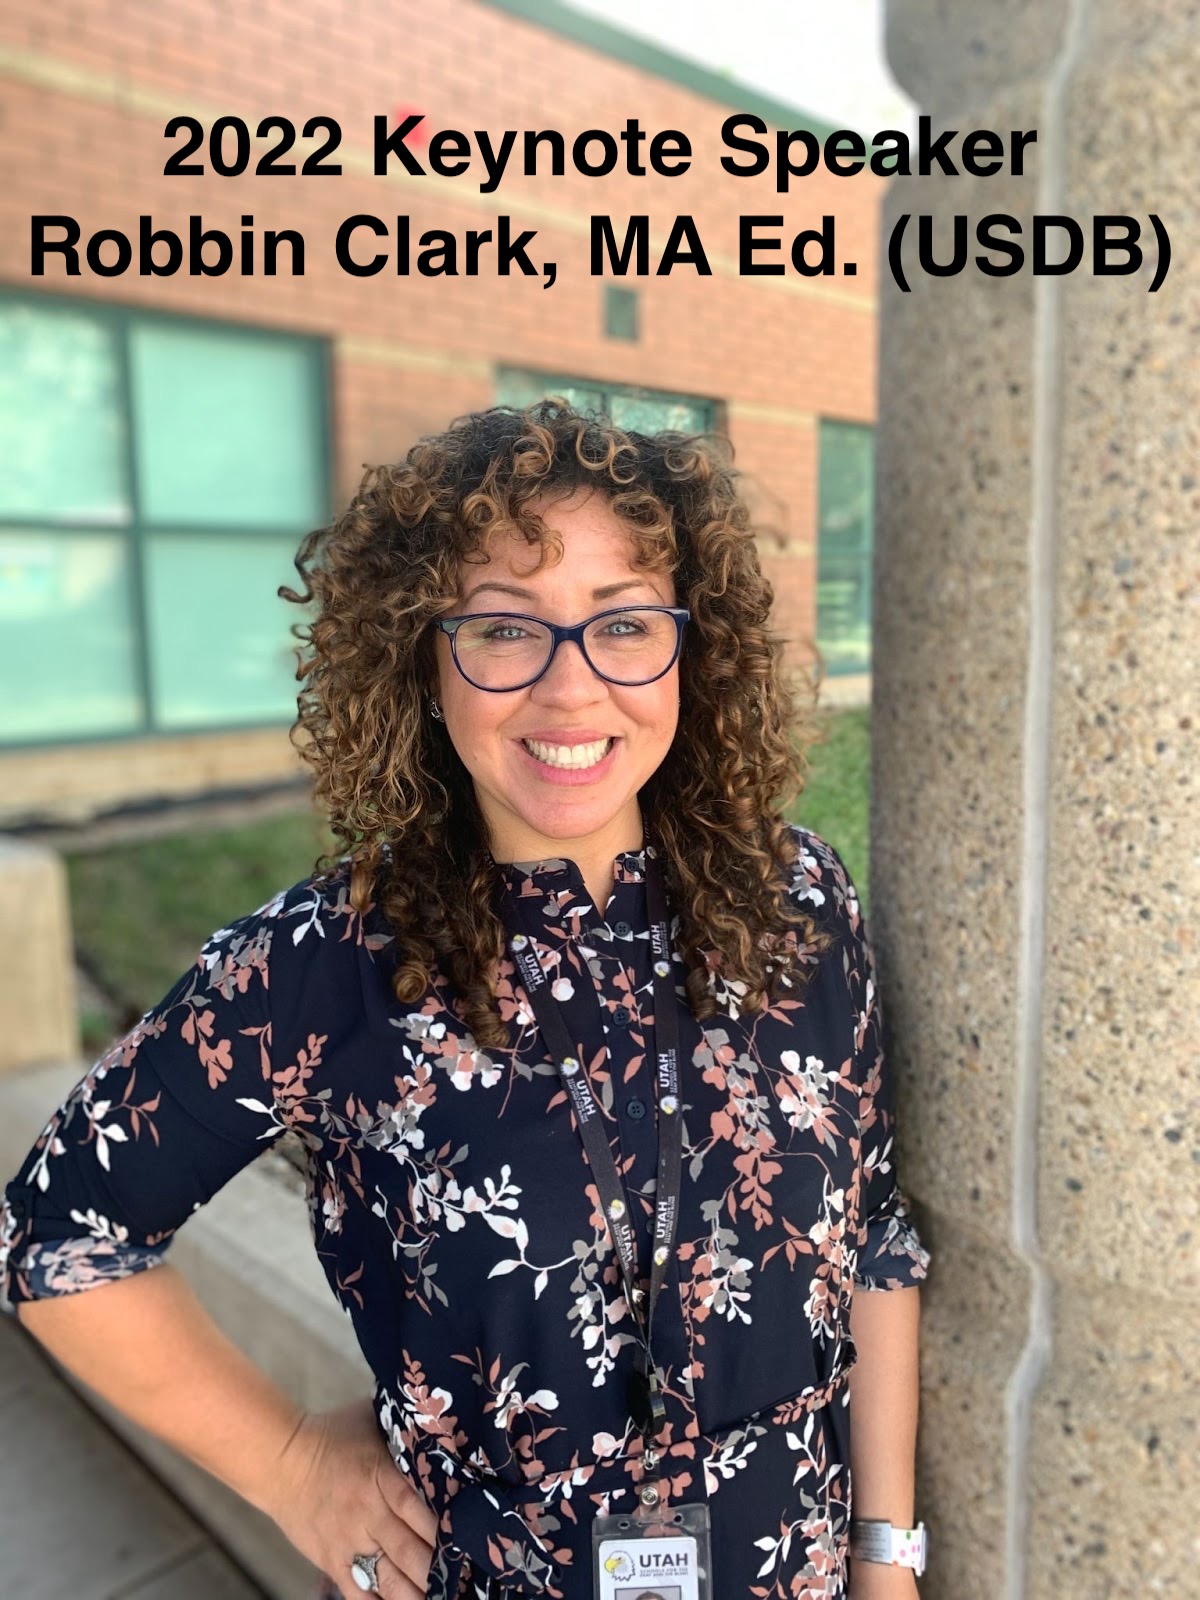 2022 Keynote Speaker Robbin Clark (MA Ed. USDB) stands against a pole wearing a dress with flowers, glasses, and has brown curly hair and smiles for the camera